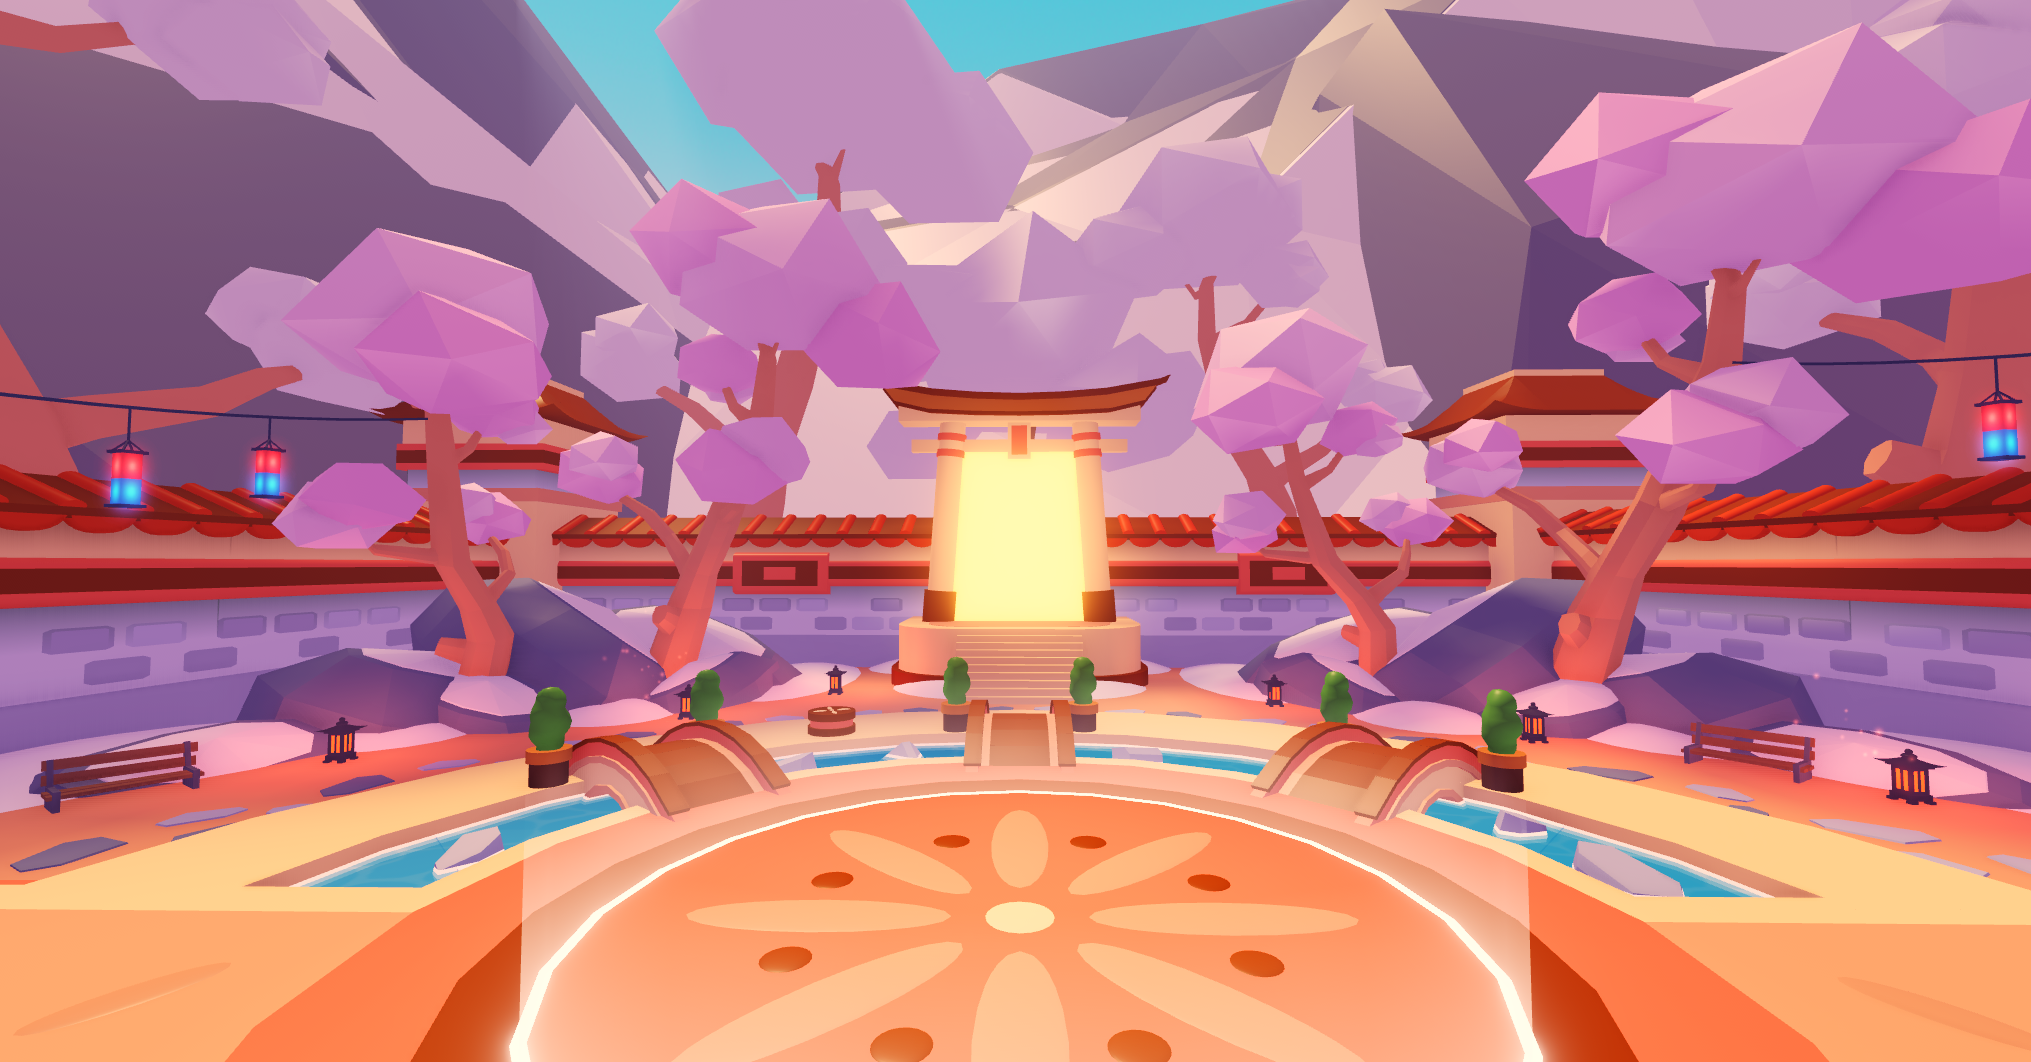 A towering gate overlooks a serene courtyard surrounded by cherry blossom trees. This image depicts the event area for the Adopt Me Lunar New Year event.